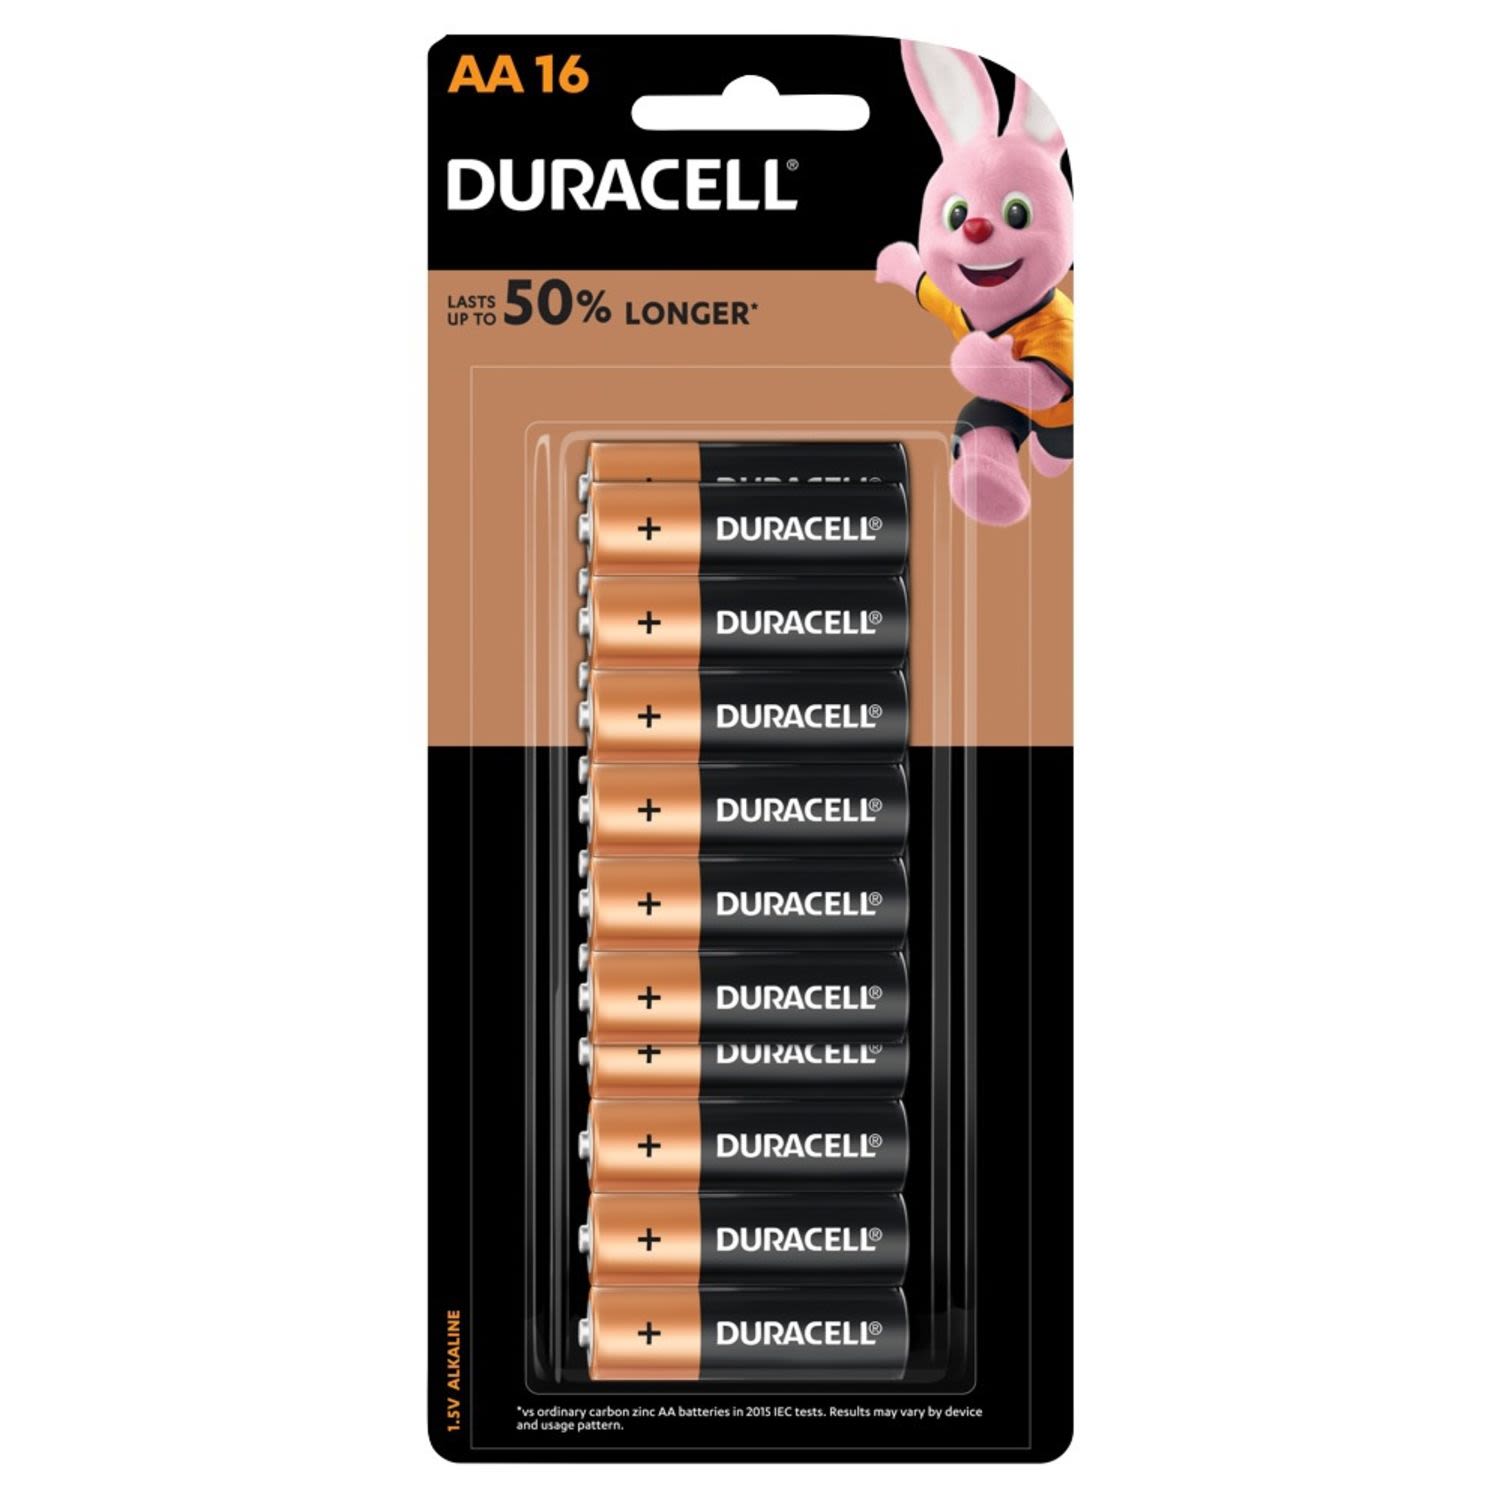 Duracell Coppertop AA.

No Mercury Added.

1.5 Volt Batteries.

Duracell Coppertop AA Alkaline Batteries lasts up to 50% longer*
*vs. ordinary carbon zinc AA batteries in 2015 IEC tests. Results may vary by device and usage pattern. <br /> <br />